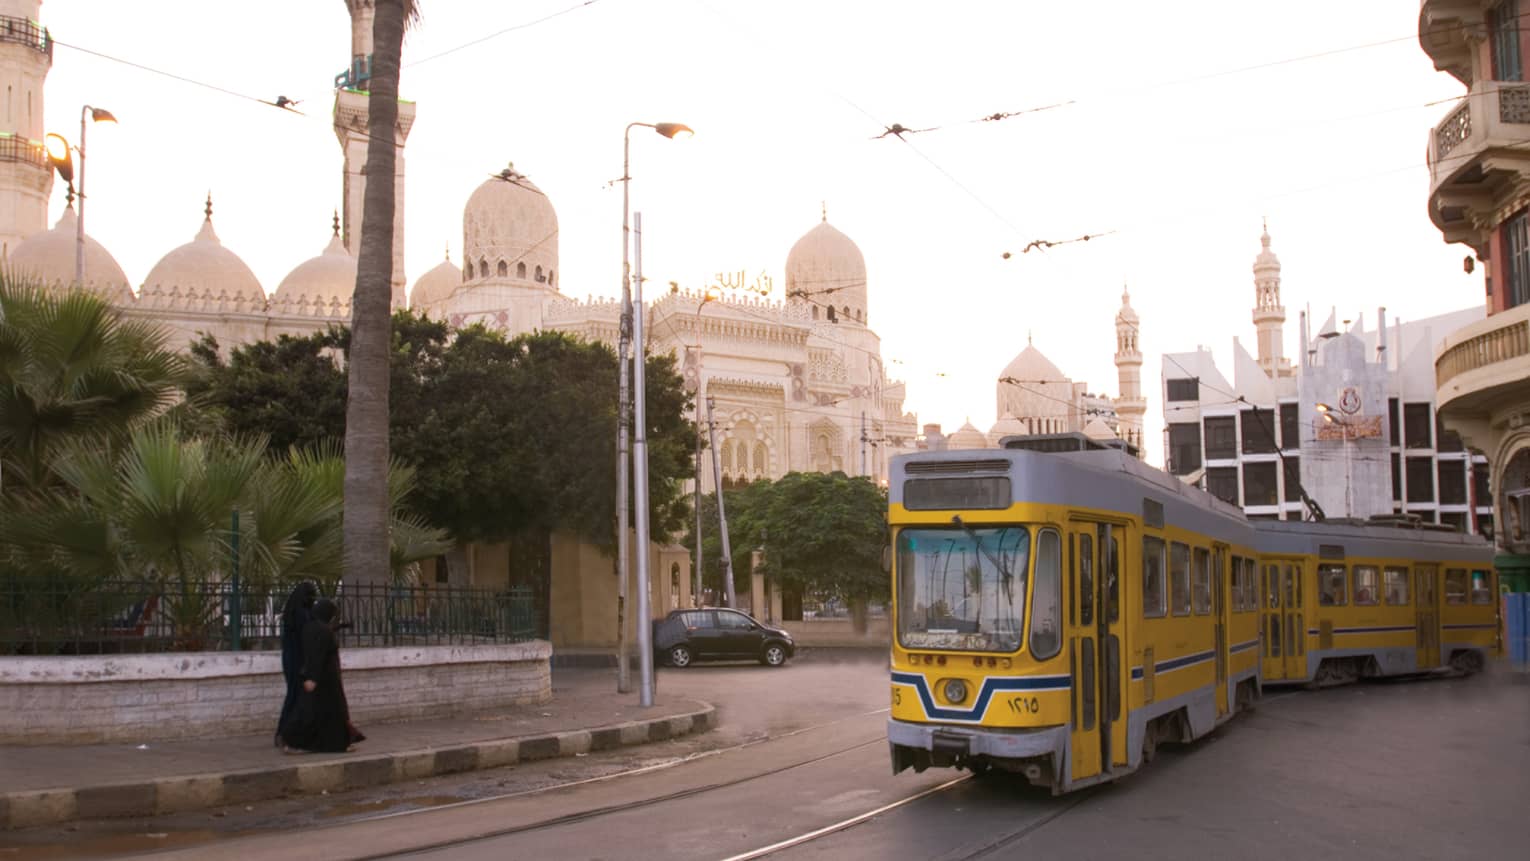 Yellow trolley car on track in front of El-Mursi Abul Abbas Mosque on sunny day